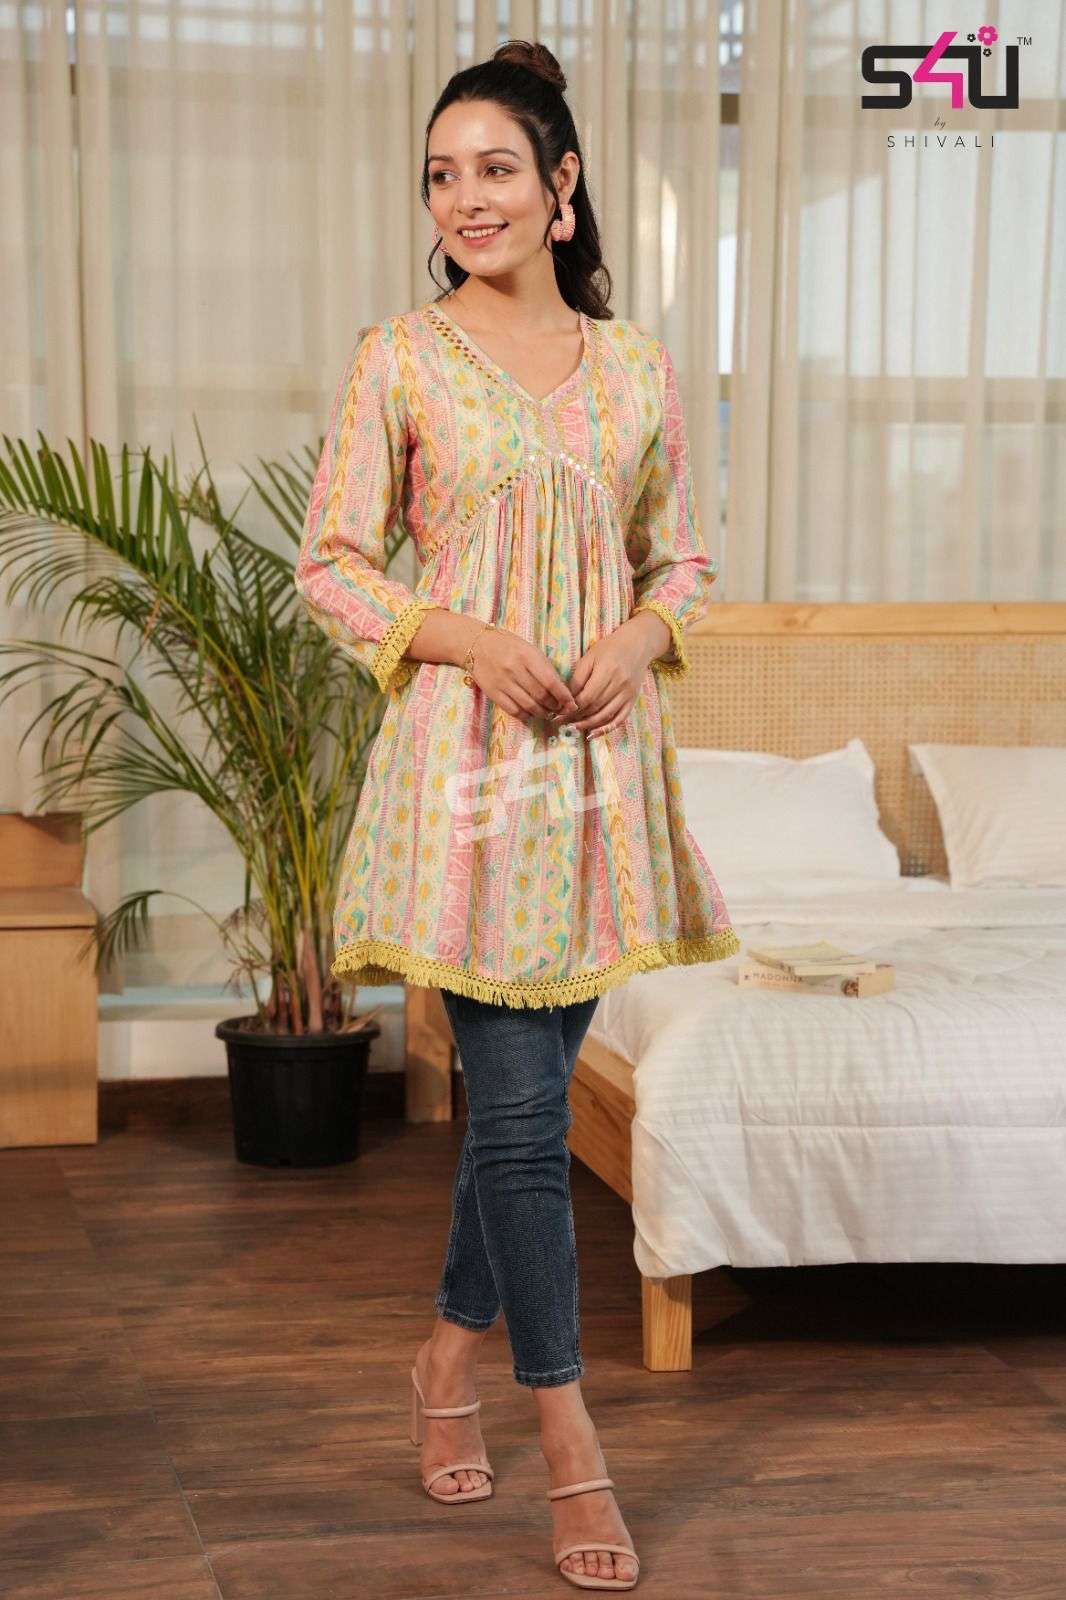 Wedesi By S4U Fashion 01 To 06 Series Designer Stylish Fancy Colorful Beautiful Party Wear & Ethnic Wear Collection Cotton Rayon Tops At Wholesale Price